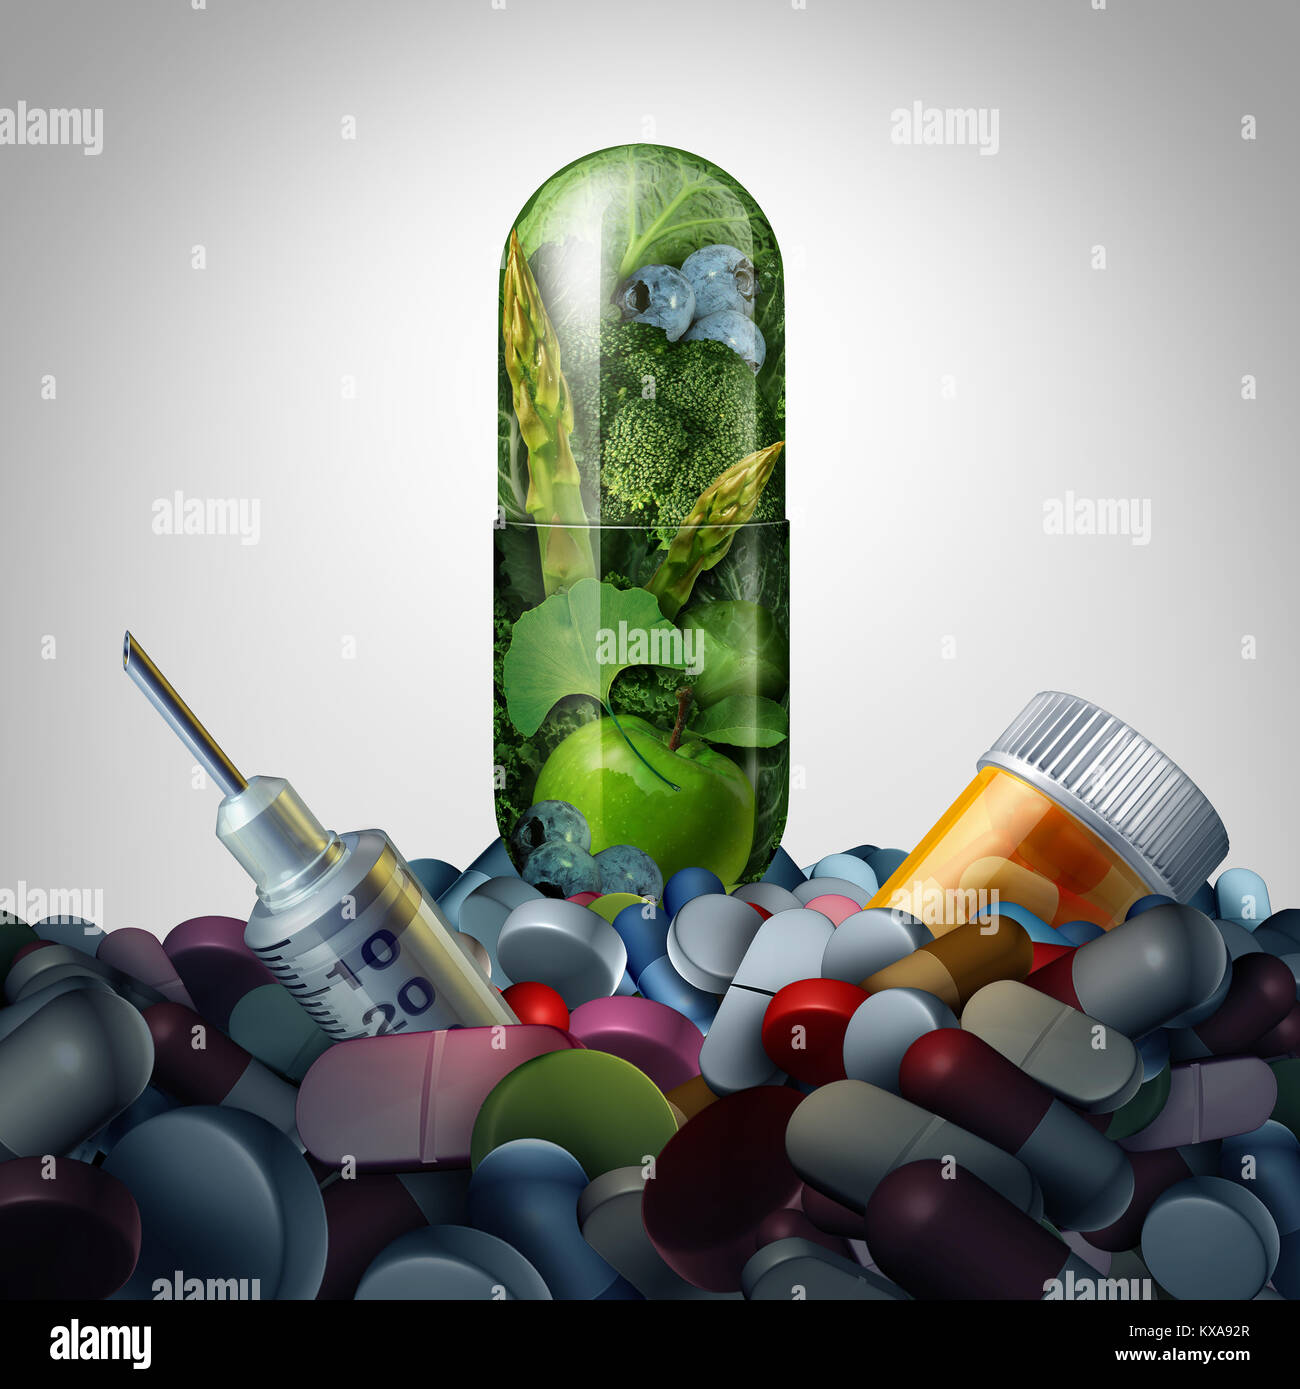 Alternative medicine supplement concept as natural herbal medication in a capsule versus pharmaceutical treatment as a 3D illustration. Stock Photo